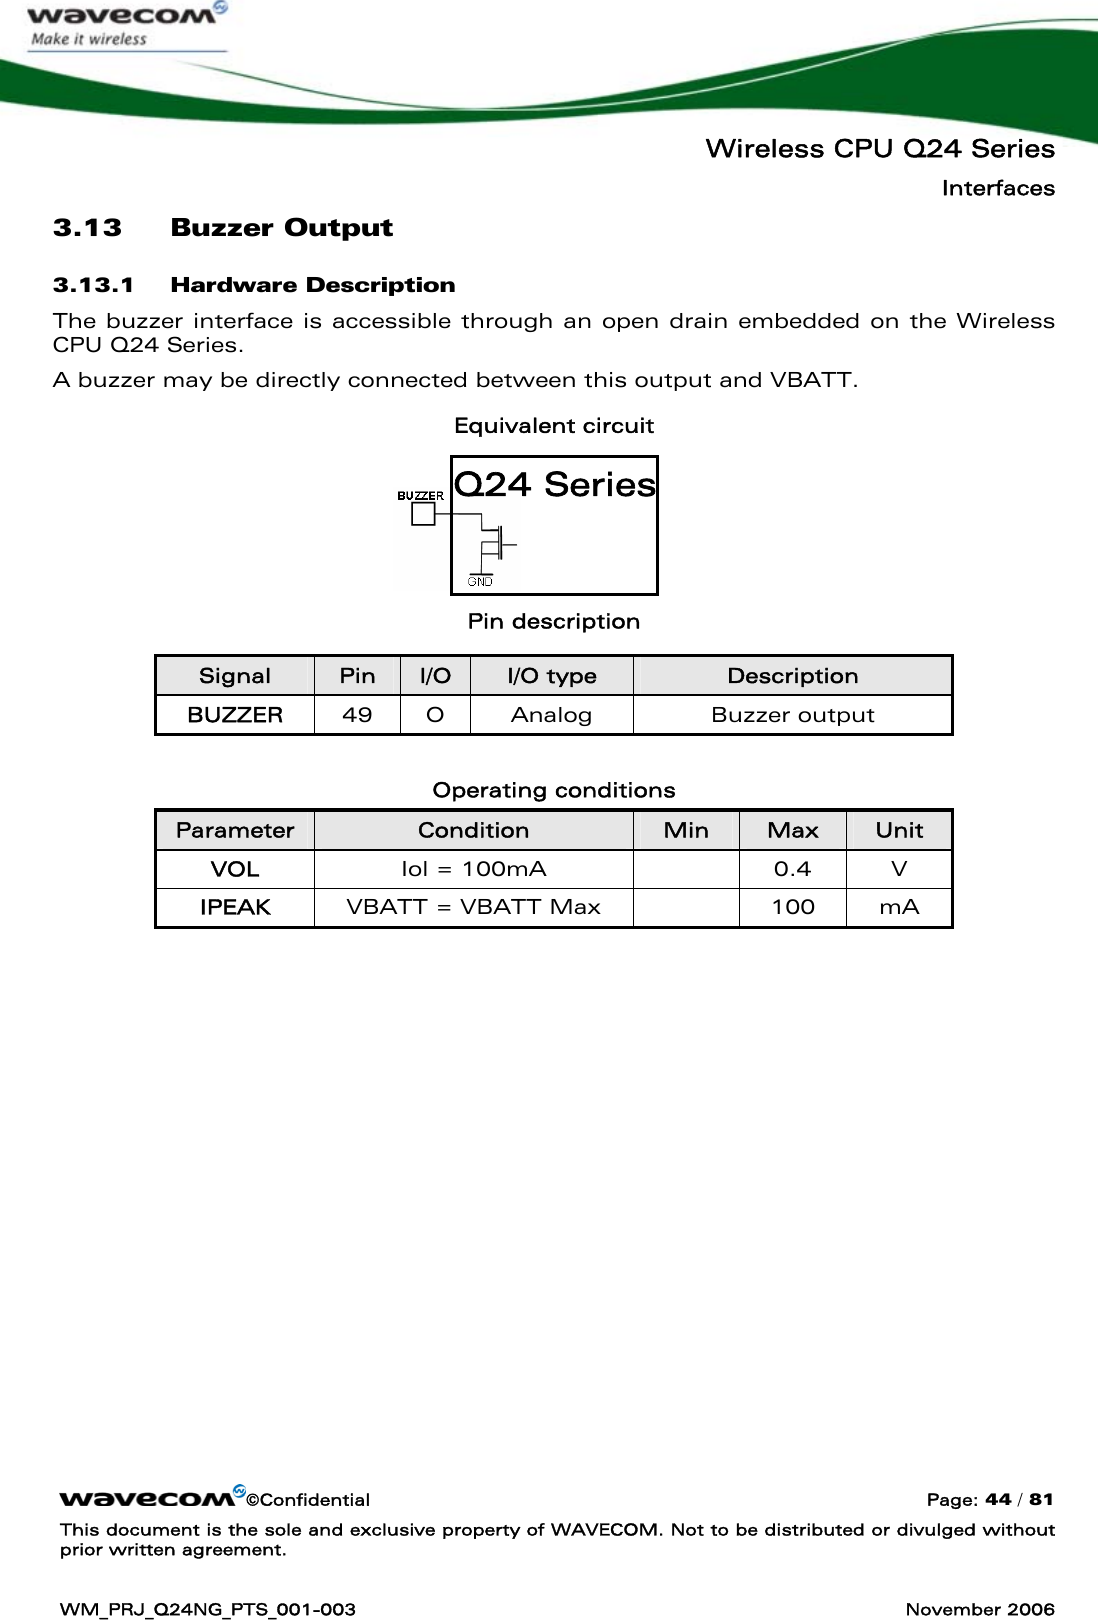   Wireless CPU Q24 Series Interfaces ©Confidential  Page: 44 / 81 This document is the sole and exclusive property of WAVECOM. Not to be distributed or divulged without prior written agreement.  WM_PRJ_Q24NG_PTS_001-003  November 2006  3.13 Buzzer Output  3.13.1 Hardware Description The buzzer interface is accessible through an open drain embedded on the Wireless CPU Q24 Series. A buzzer may be directly connected between this output and VBATT. Equivalent circuit     Pin description Signal  Pin  I/O  I/O type  Description BUZZER  49 O  Analog  Buzzer output  Operating conditions Parameter  Condition  Min  Max  Unit VOL  Iol = 100mA    0.4  V IPEAK  VBATT = VBATT Max    100  mA  Q24 Series 